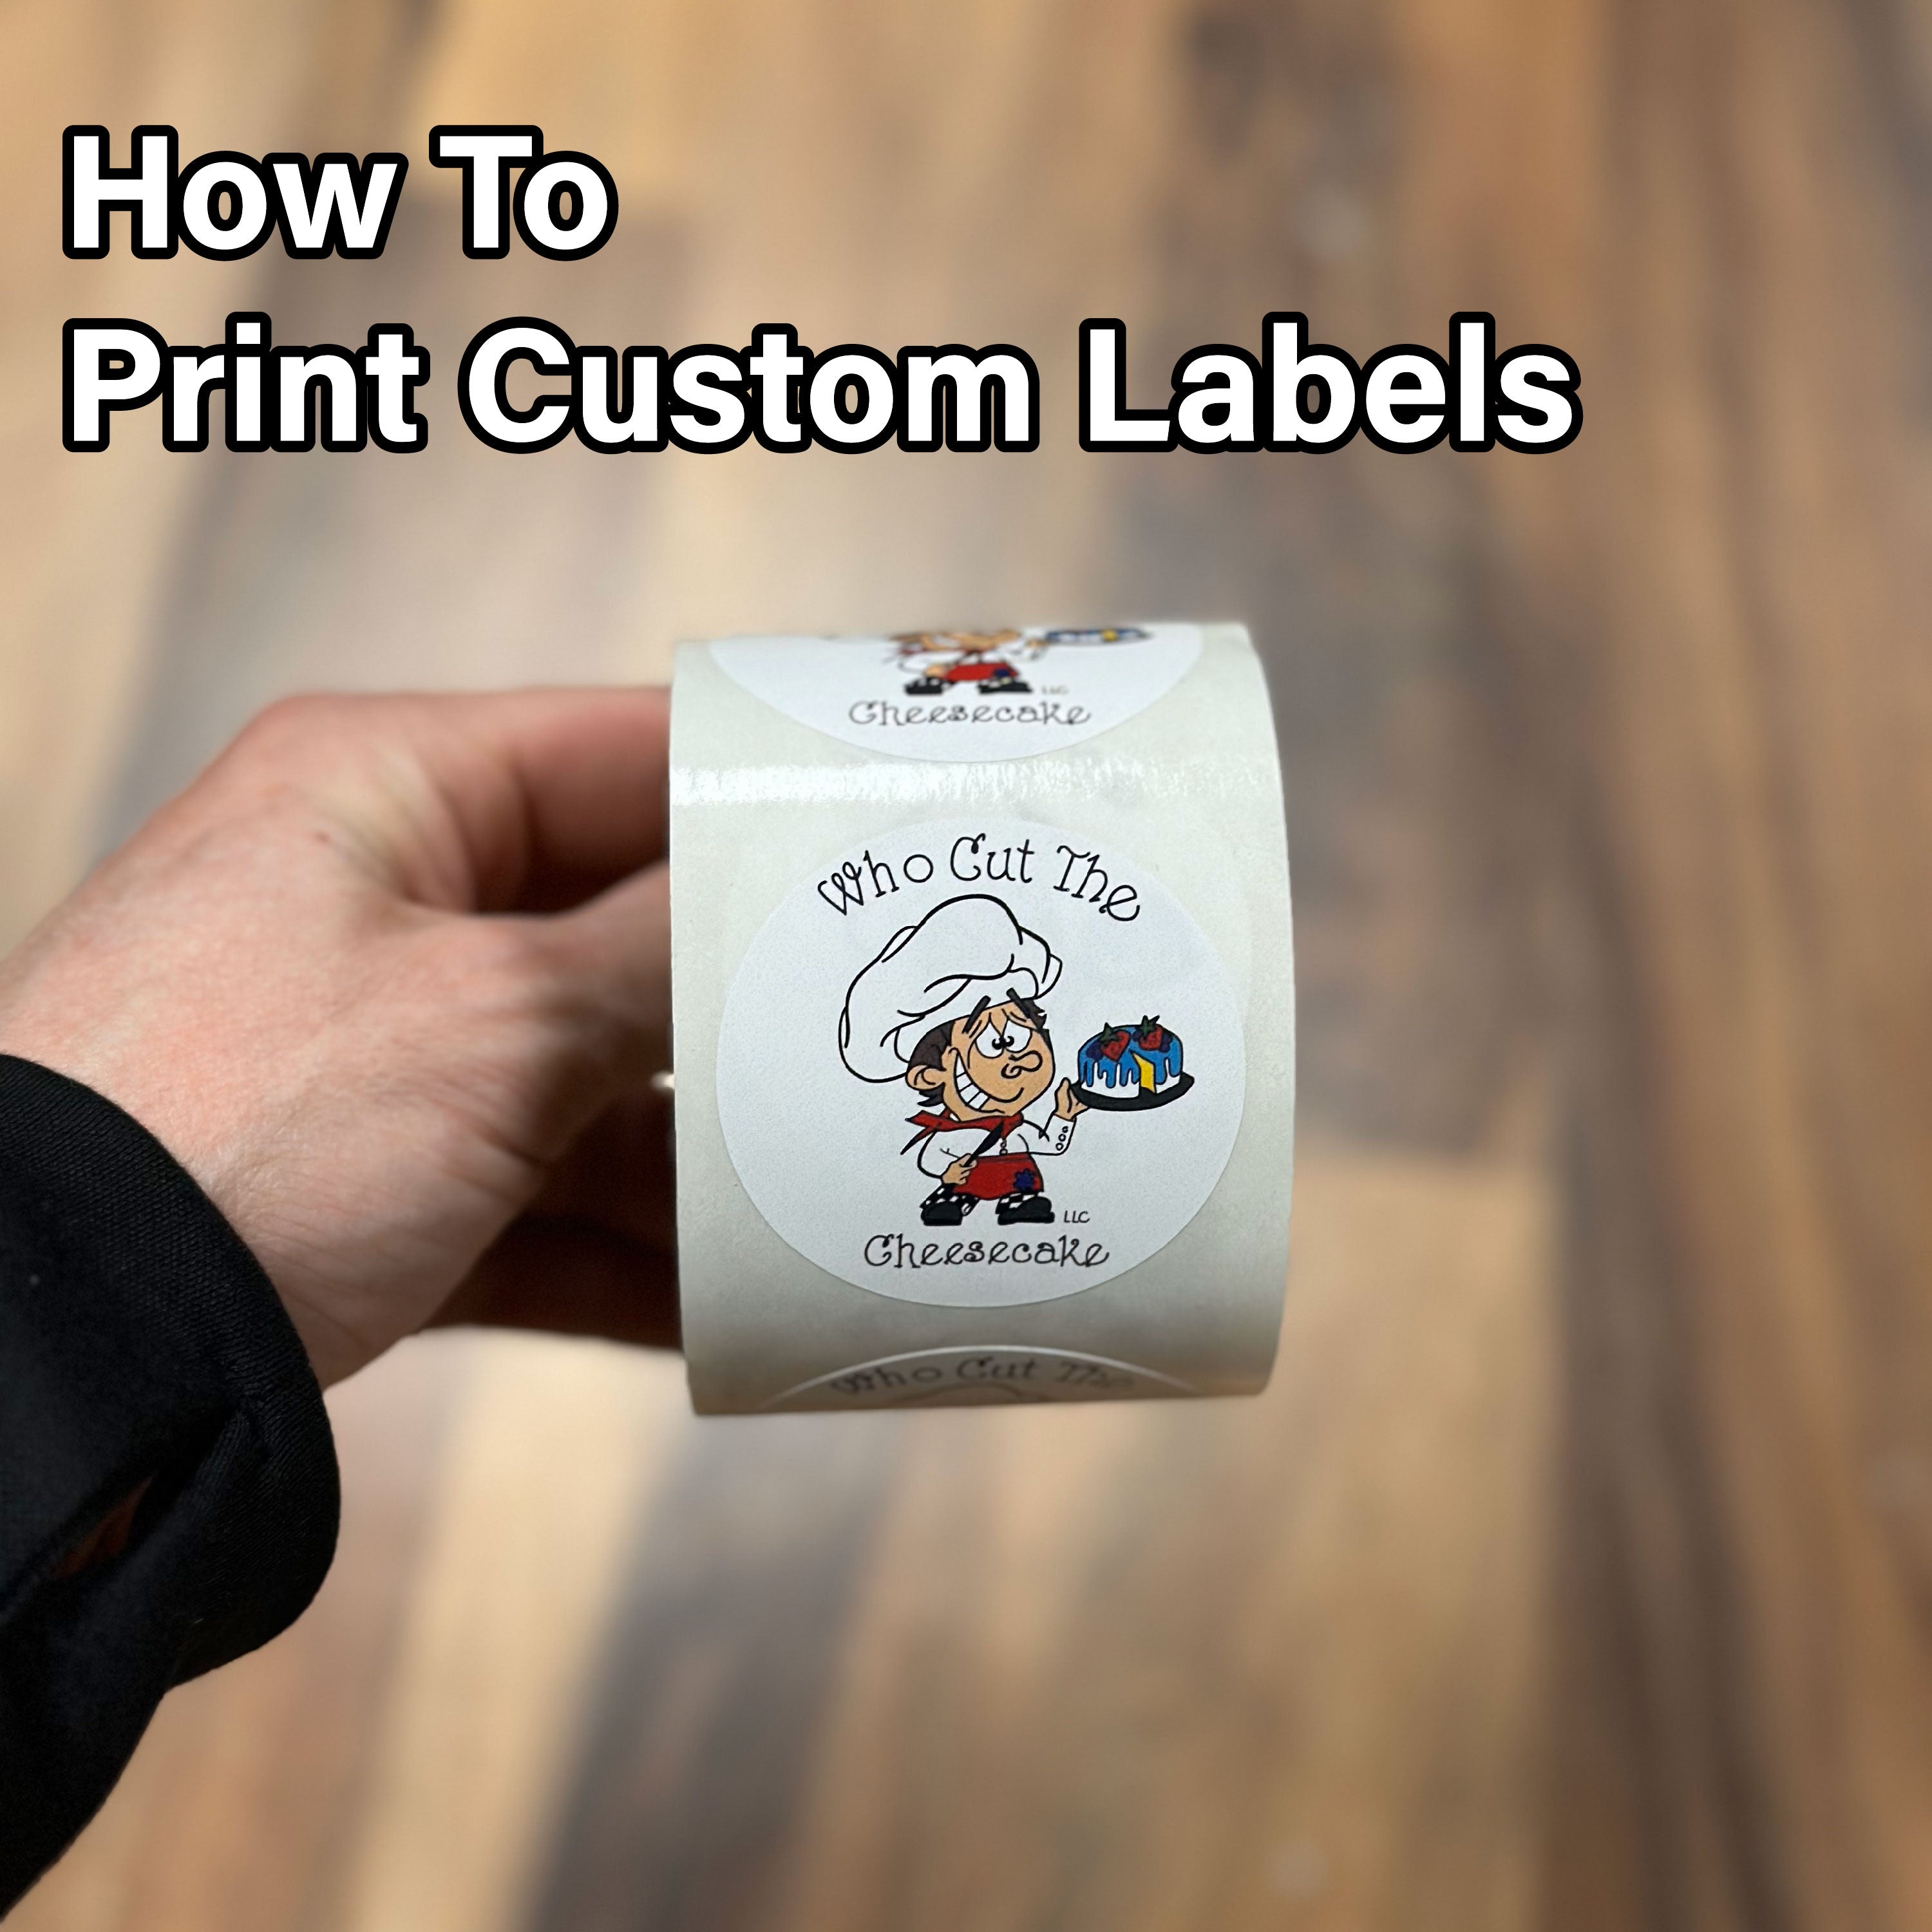 How To Print Custom Labels?